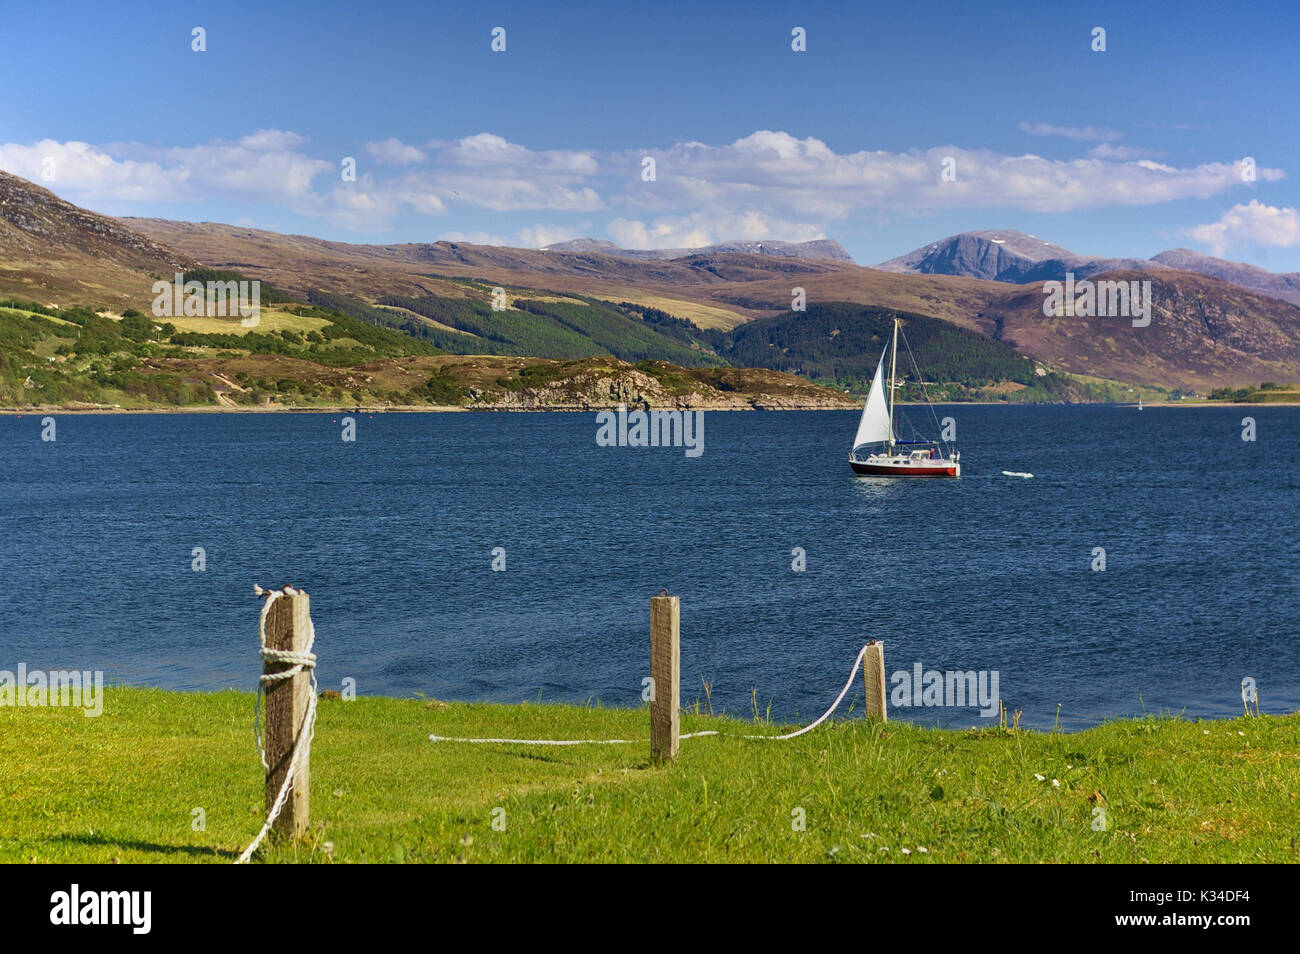 Sailing yacht at sea with mountain range in the background and green grassy seashore in the foreground, Ullapool, Wester Ross, Scotland Stock Photo